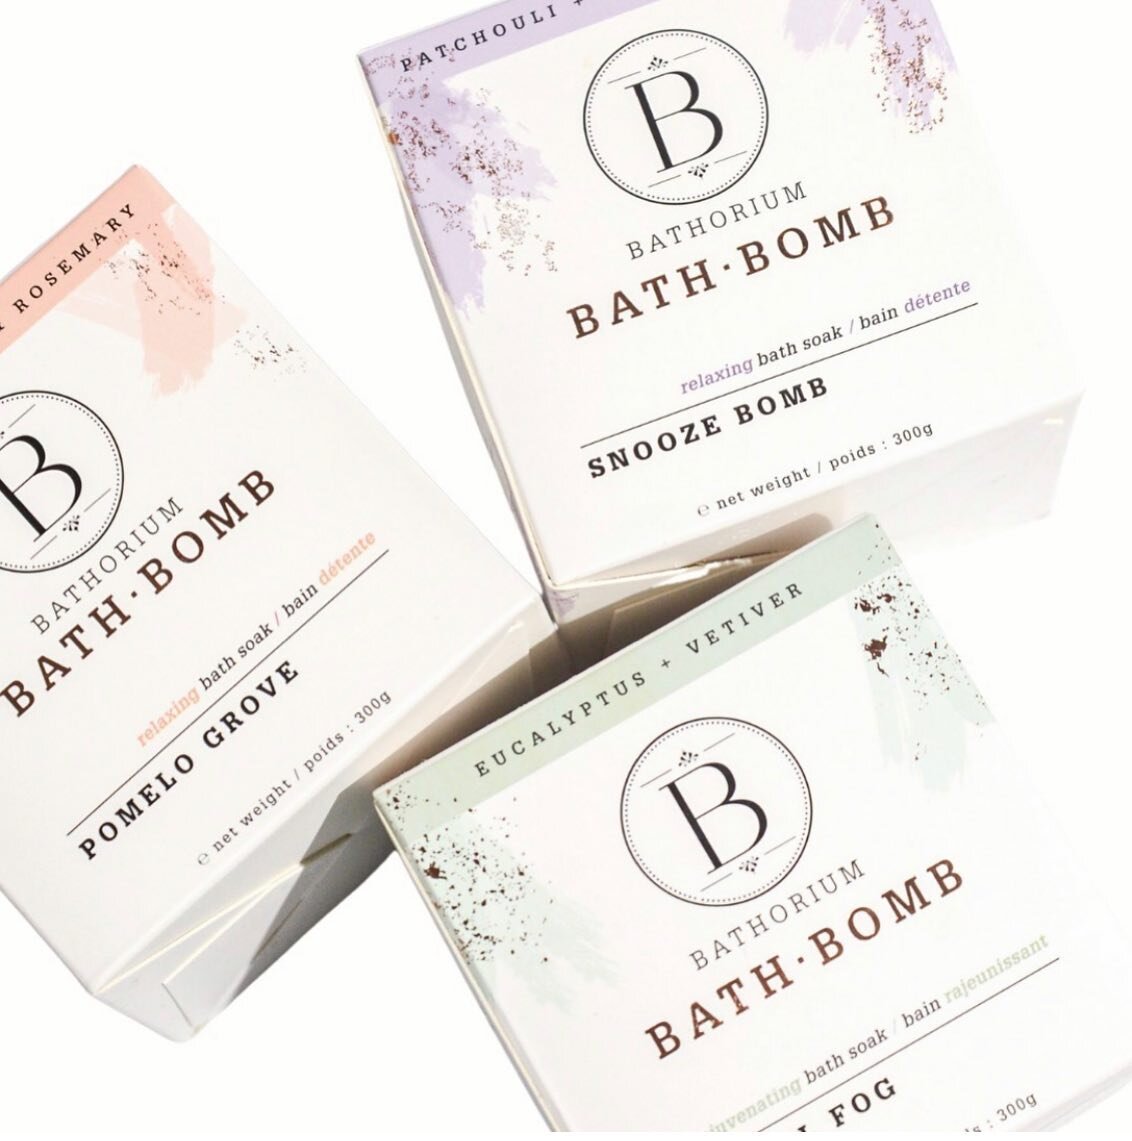 What could be better then soaking your worries away with a midweek bath ?🛀 
Relax and indulge in the luscious scents of our fave Bathorium Bath Bombs. Available in store! 
.
.
.
.
.
#bubblebath #relax #bathbomb #bathtime #skinenergetics #skincaretor